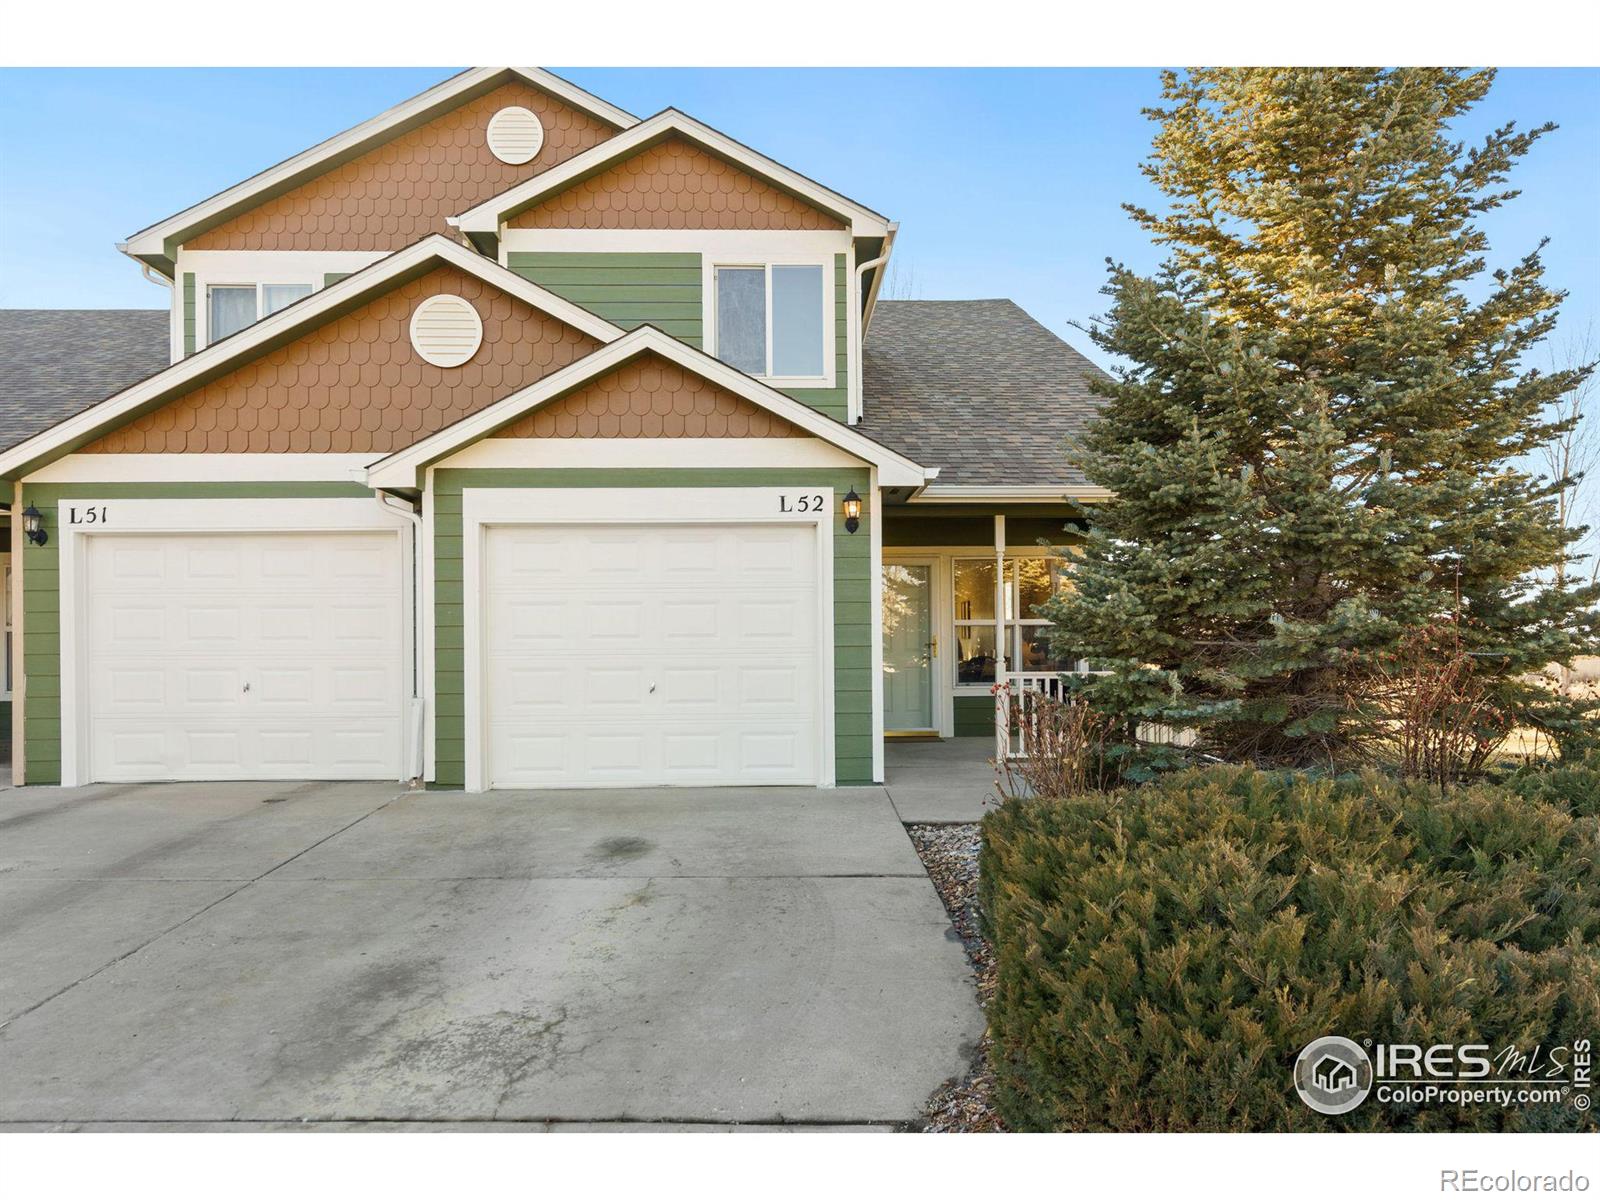 Report Image for 802  Waterglen Drive,Fort Collins, Colorado